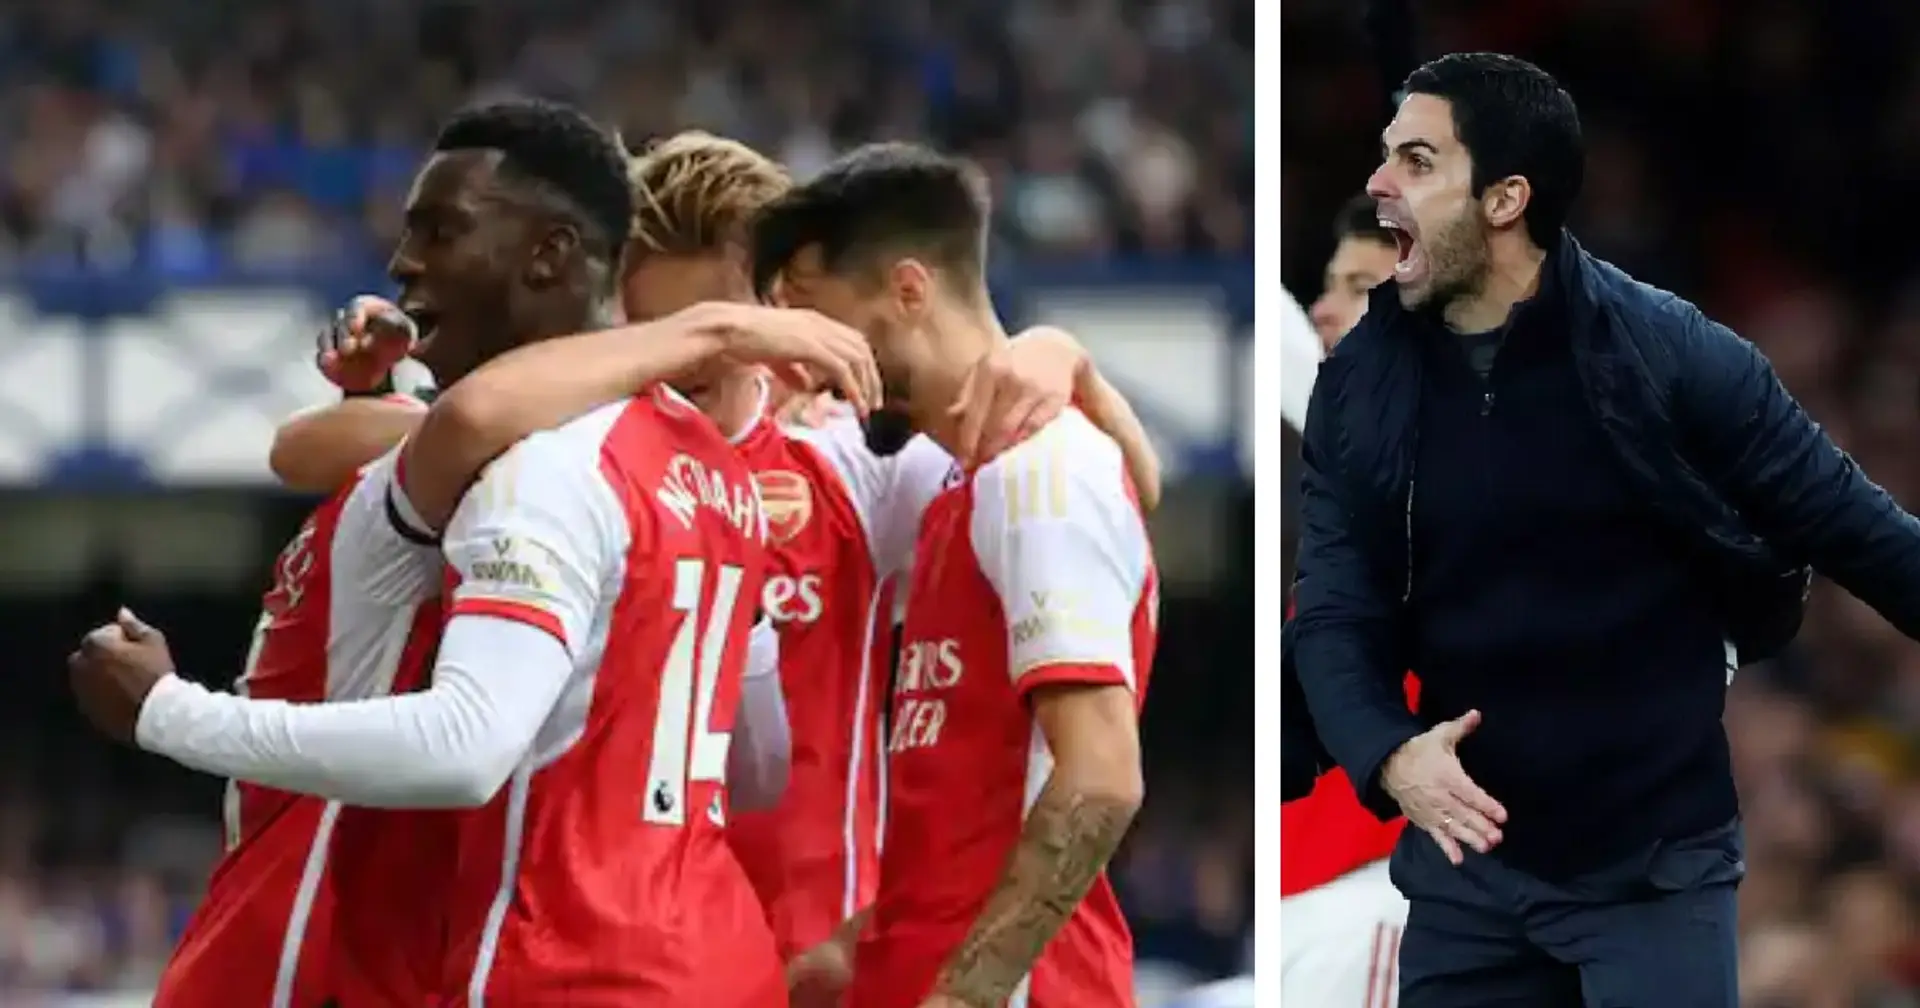 Mikel Arteta slammed for 'humiliating' his own player in Everton win